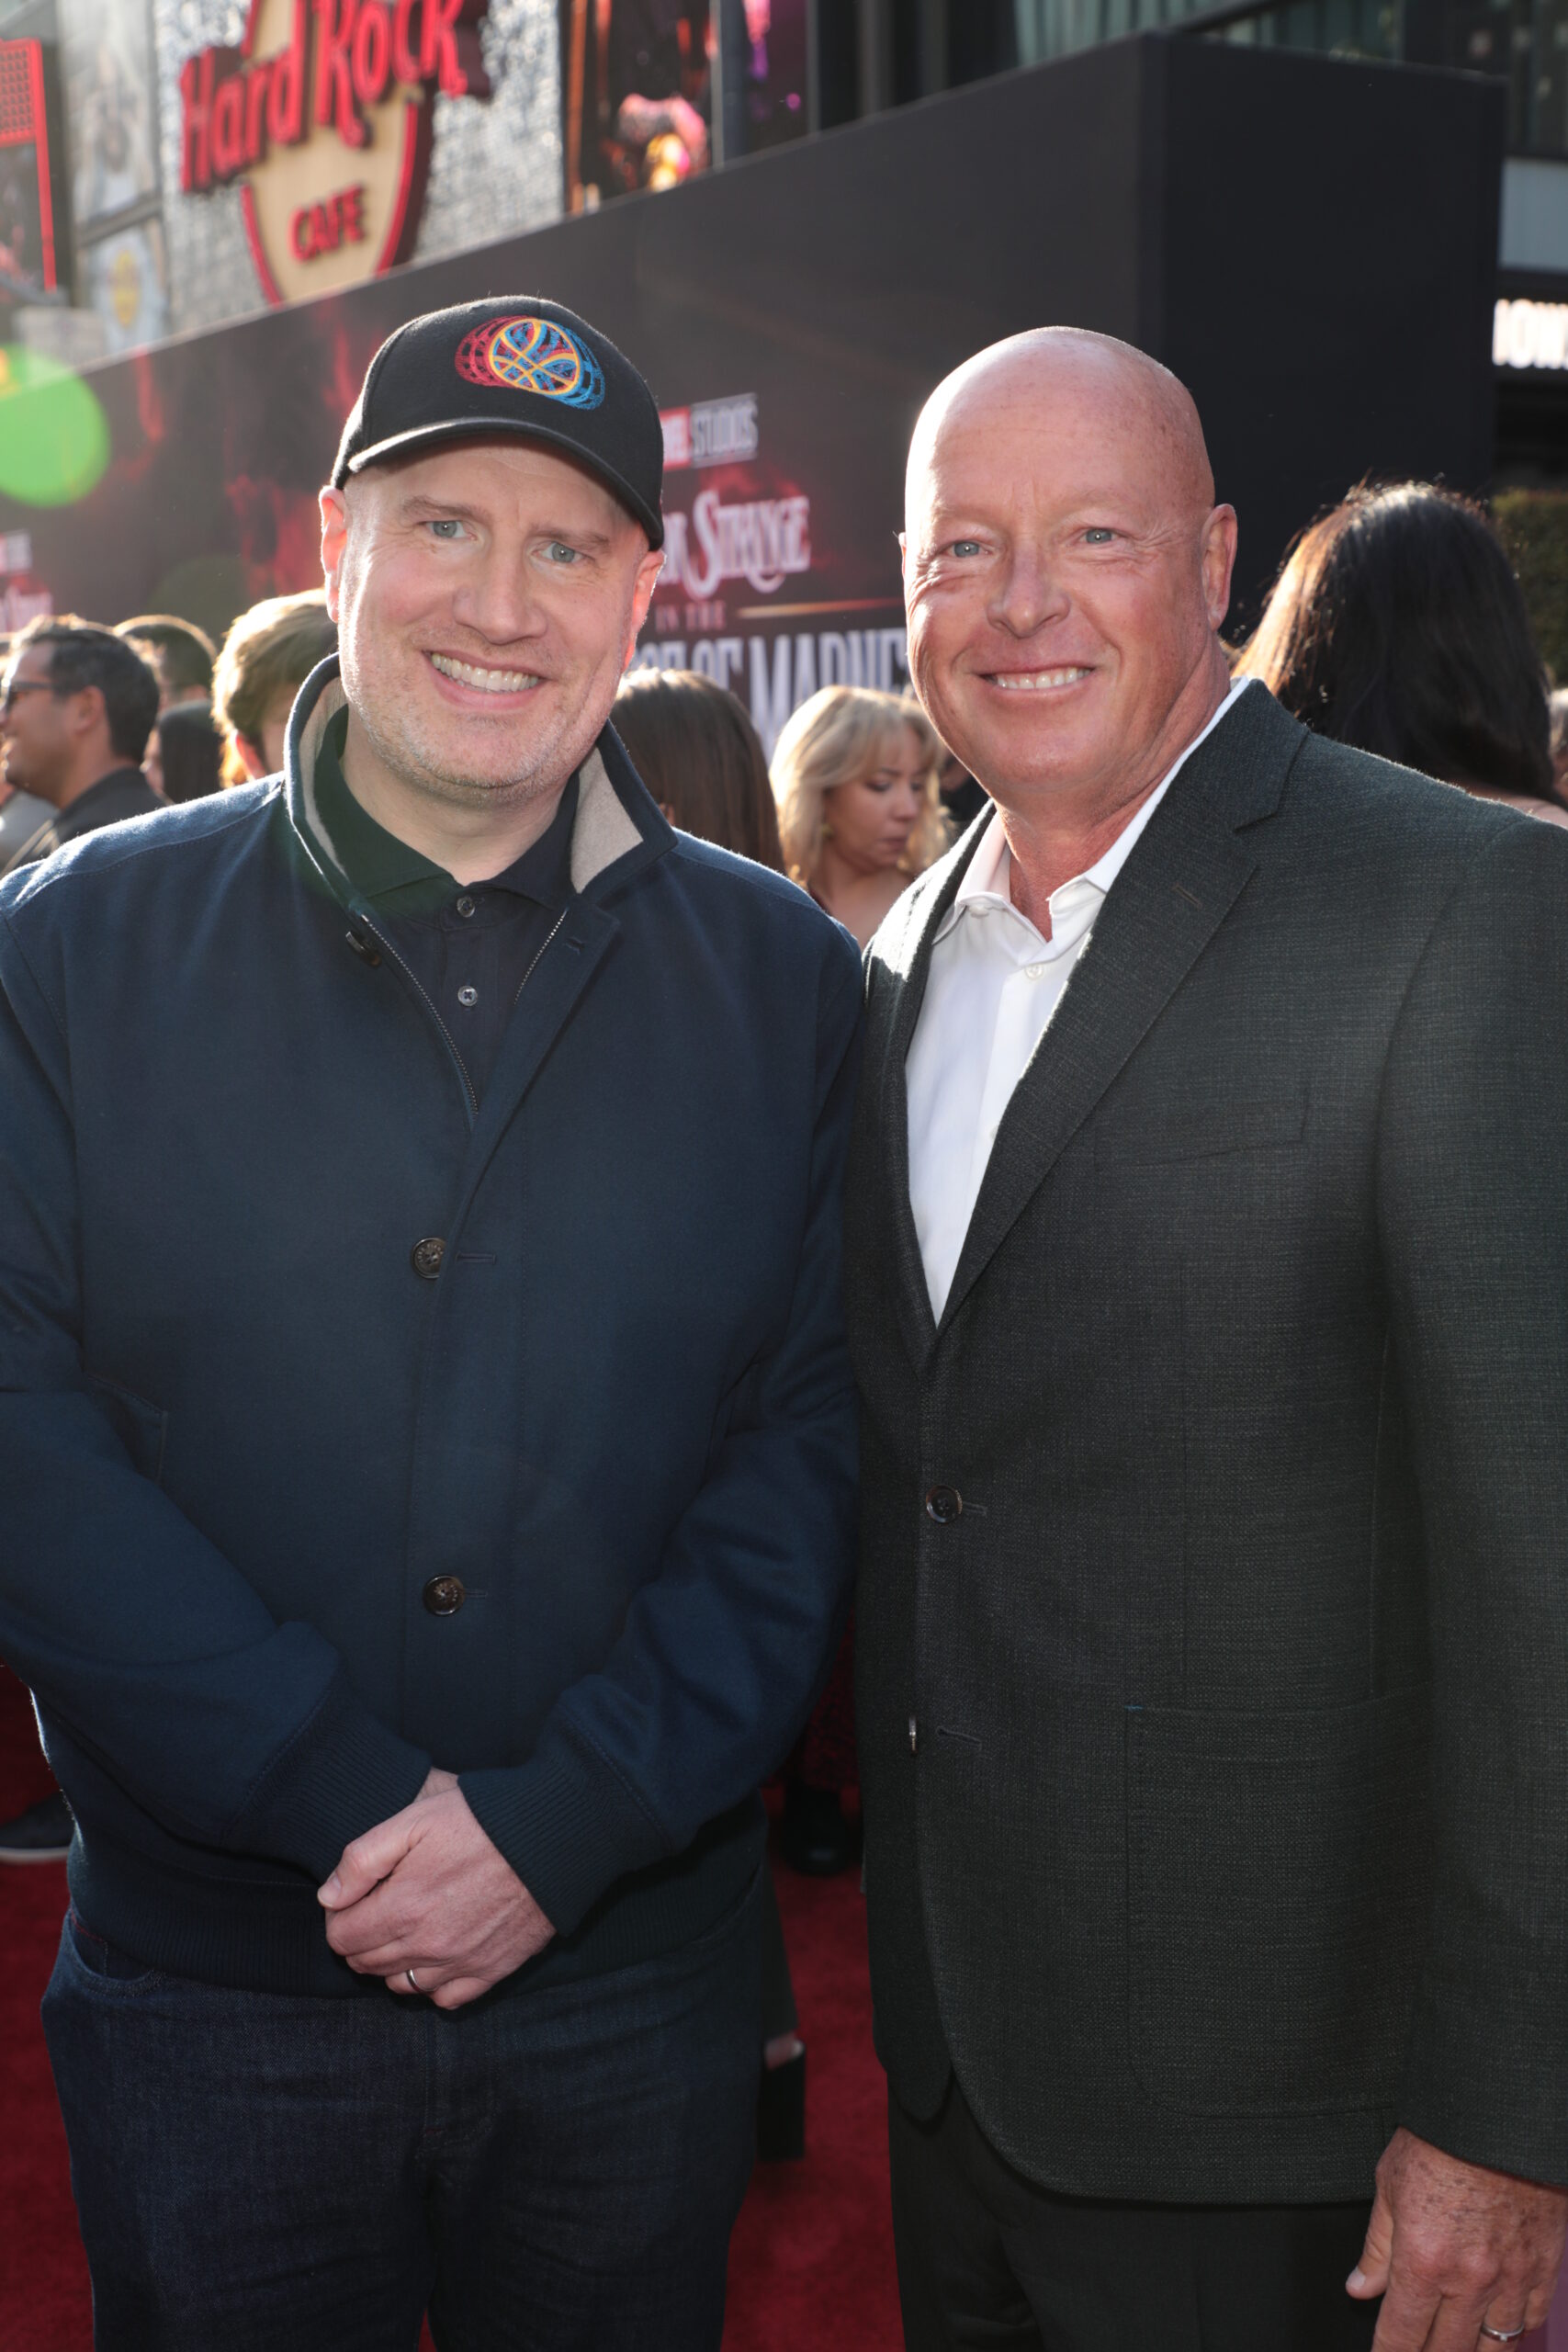 Producer Kevin Feige and Bob Chapek attend the Doctor Strange in the Multiverse of Madness World Premiere at the Dolby Theatre in Hollywood, CA on Monday, May 2, 2022.(photo: Alex J. Berliner/ABImages)